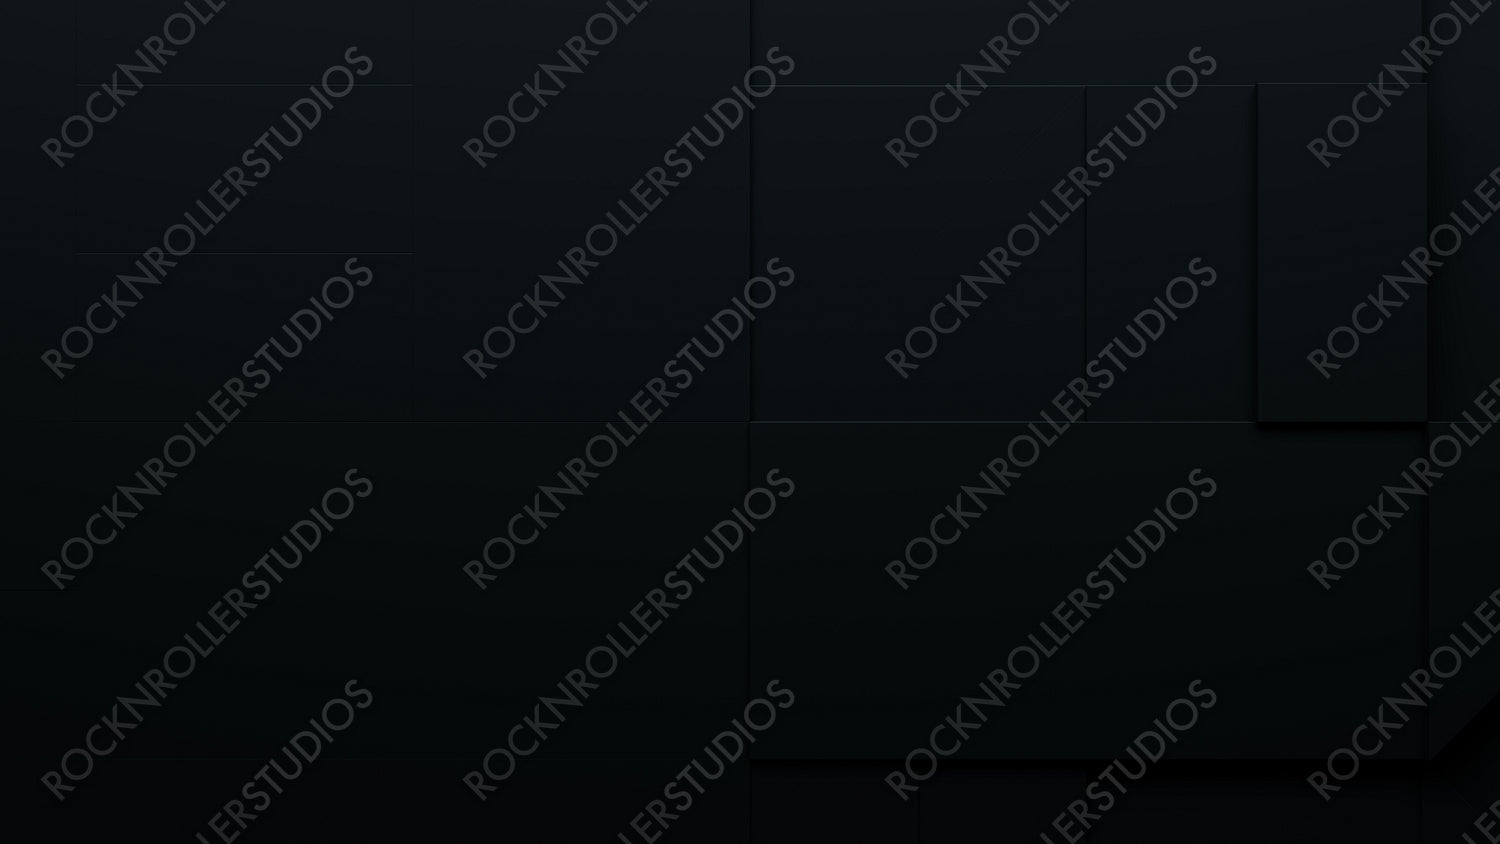 Black 3D Shapes neatly organized to make an abstract Tech background. 3D Render with copy-space.